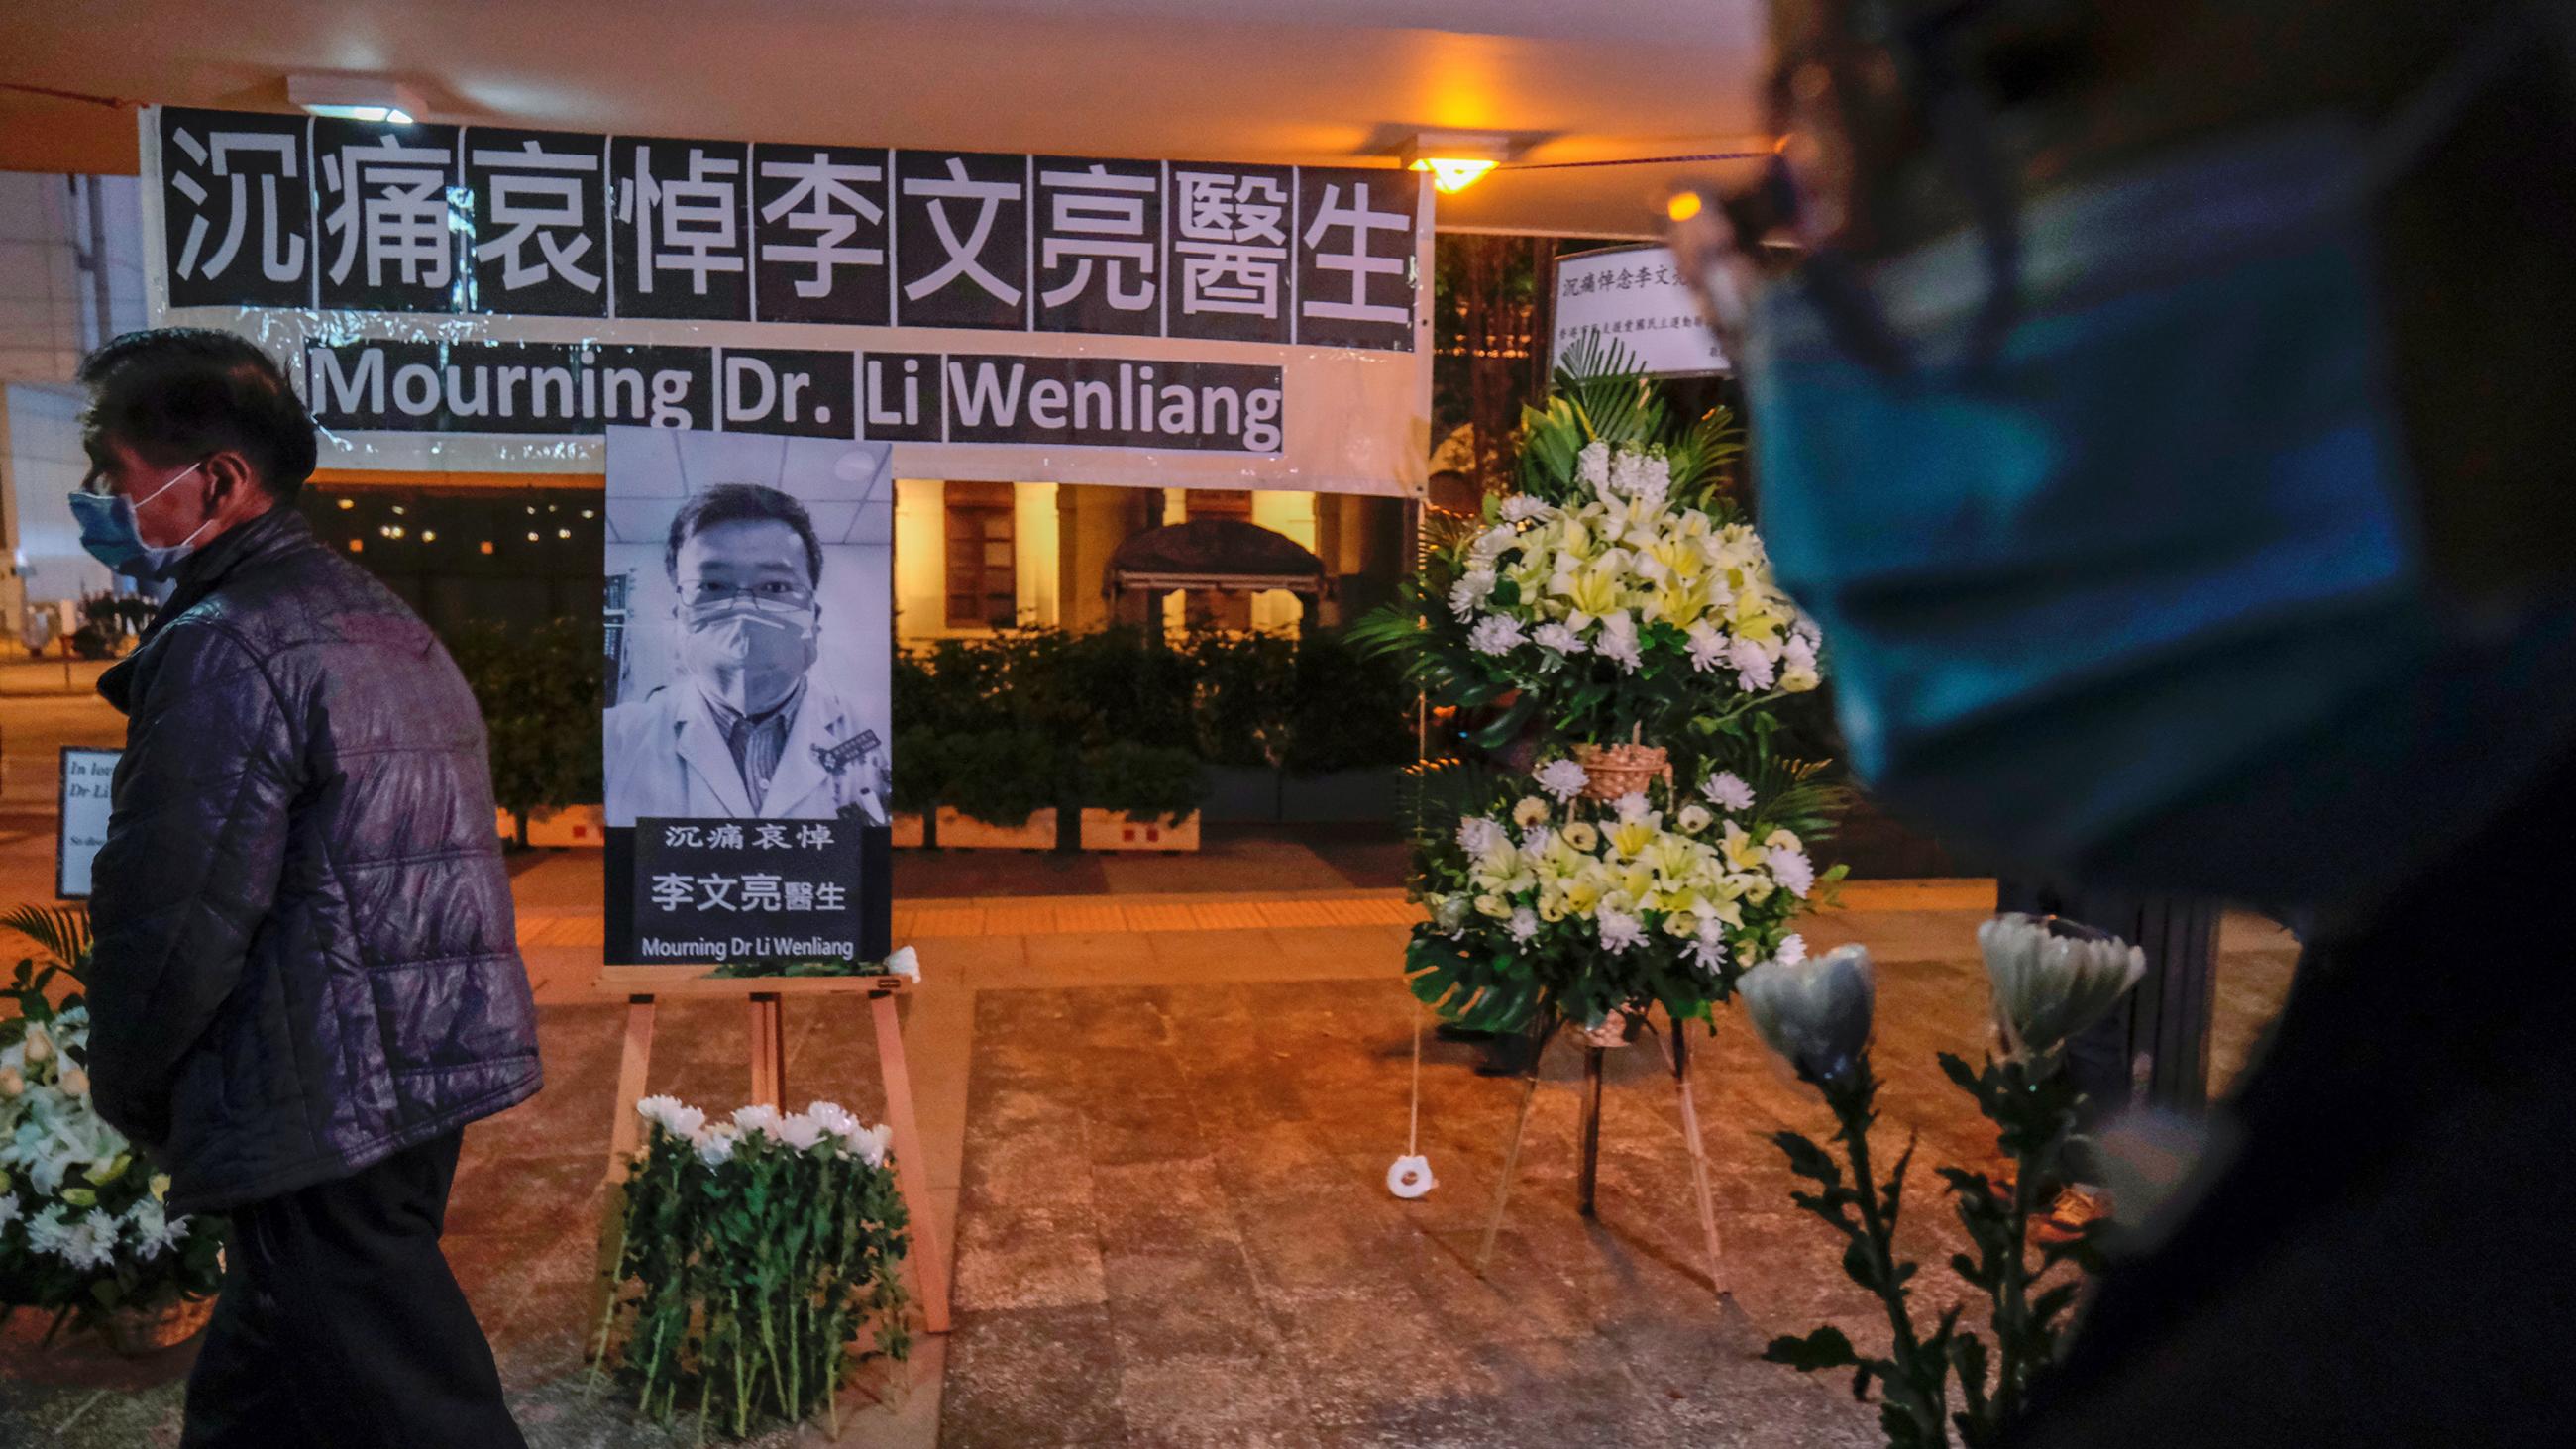 Image shows a few people wearing masks walking past a sort of shrine for the deceased doctor with lots of flowers, an enlarged photo, and some words written in Mandarin.